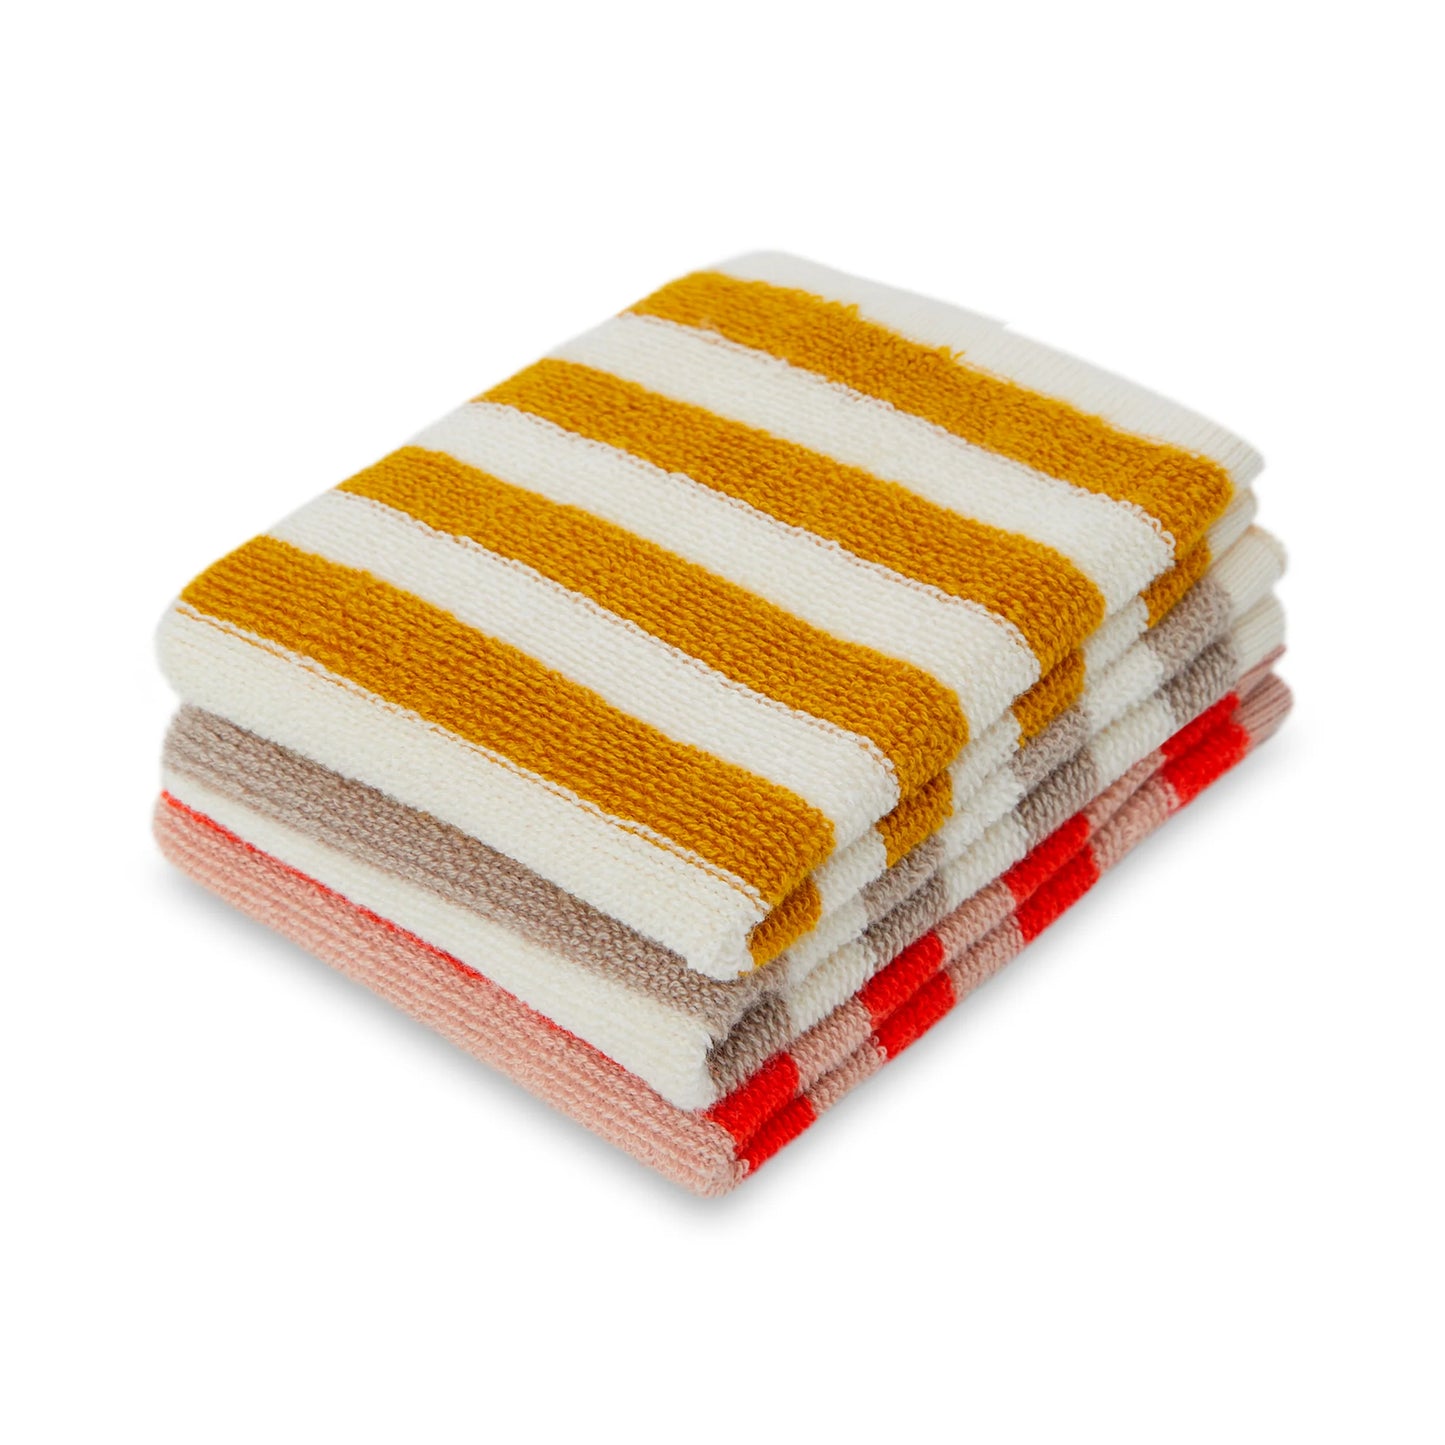 Resusable & Eco-Friendly Terry Washcloths in Striped Citrus